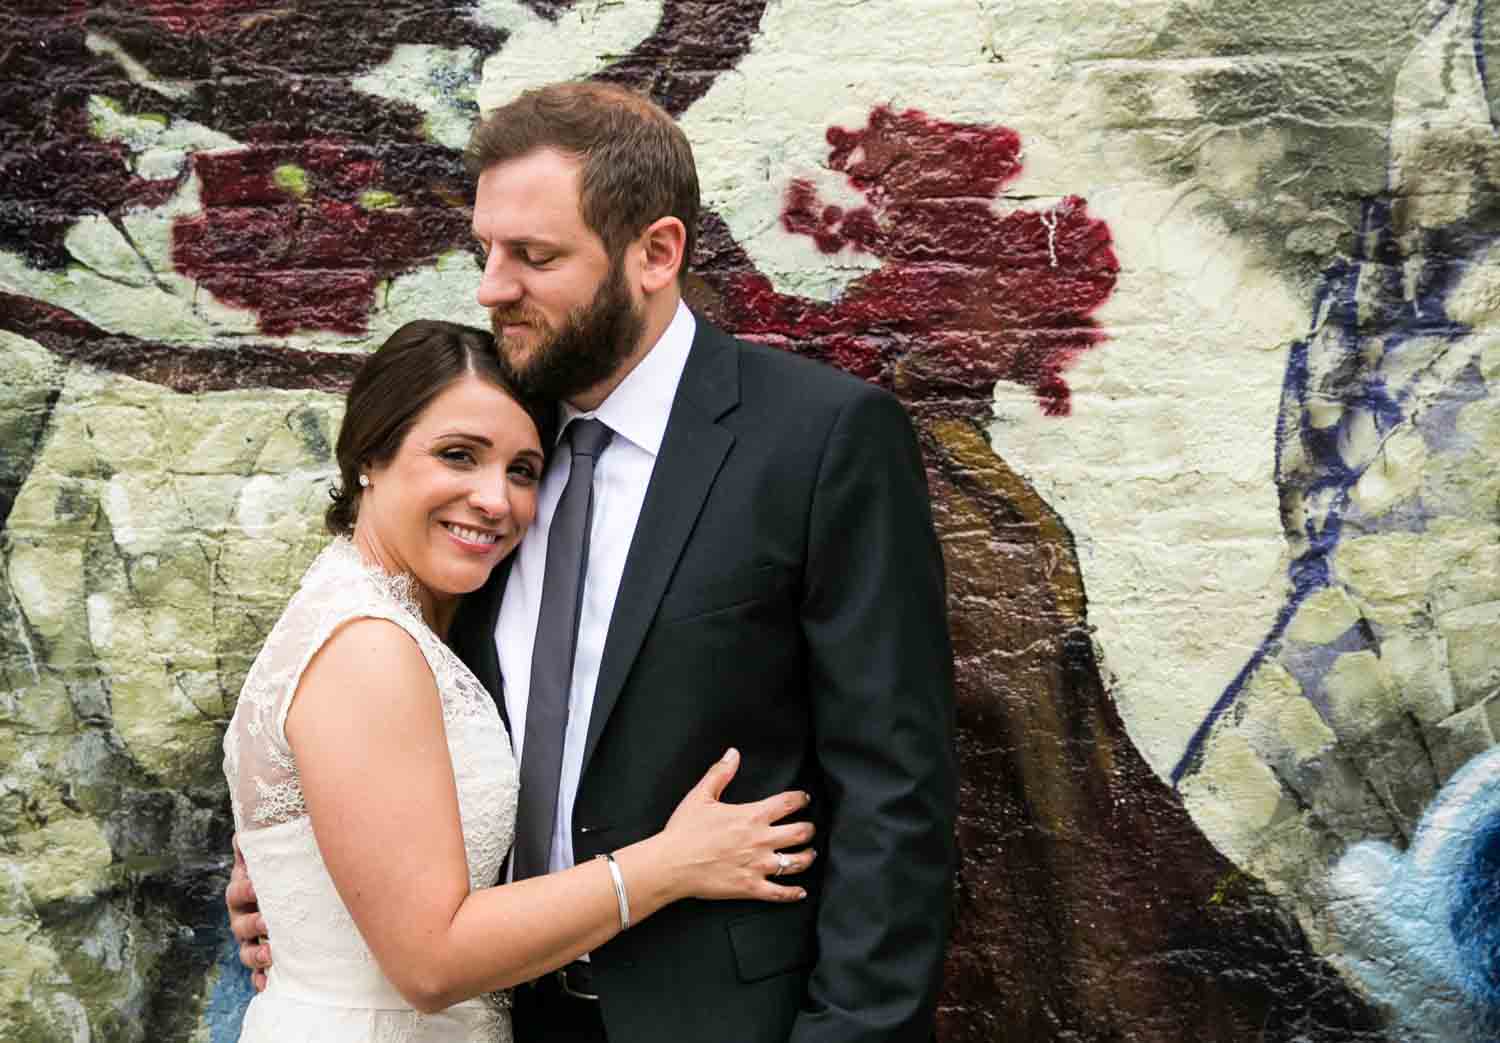 Portrait of bride and groom with colorful mural in background